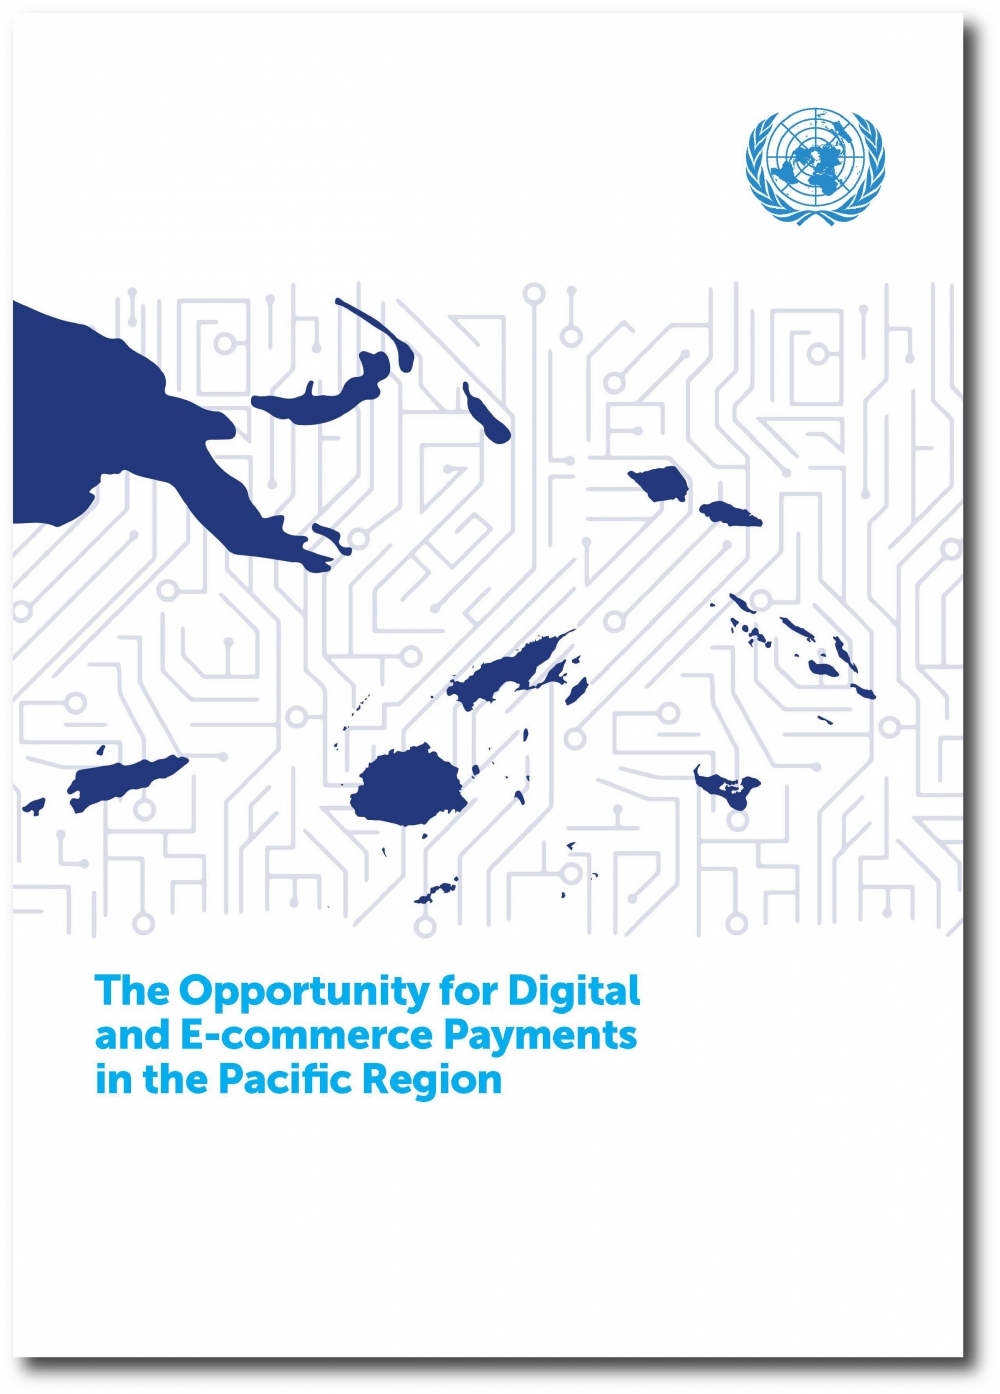 The Opportunity for Digital and E-commerce Payments in the Pacific Region - a report from the UNCDF in collaboration with Kapronasia